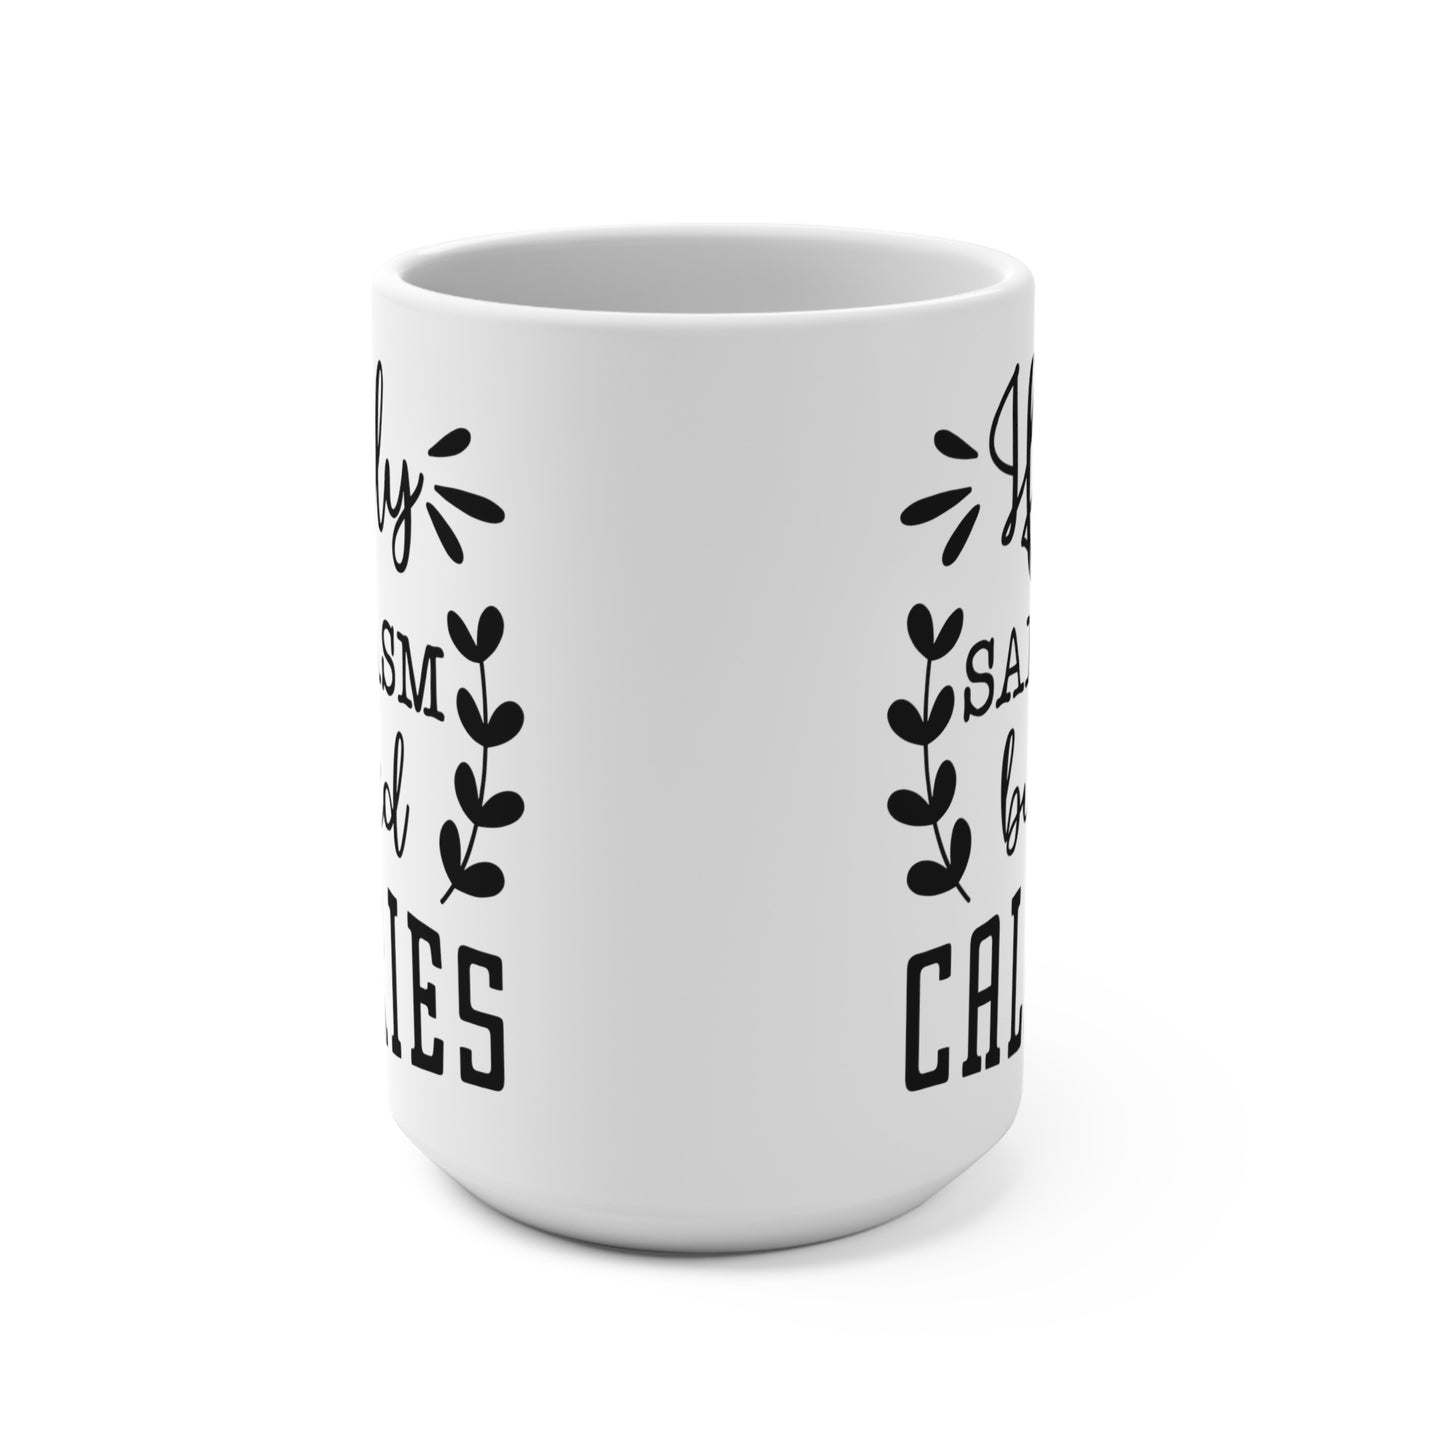 Sarcasm Burned Calories Mug, Funny Quote Coffee Cup, Unique Sassy Humor Gift, Black and White, Office Coworker Present Idea